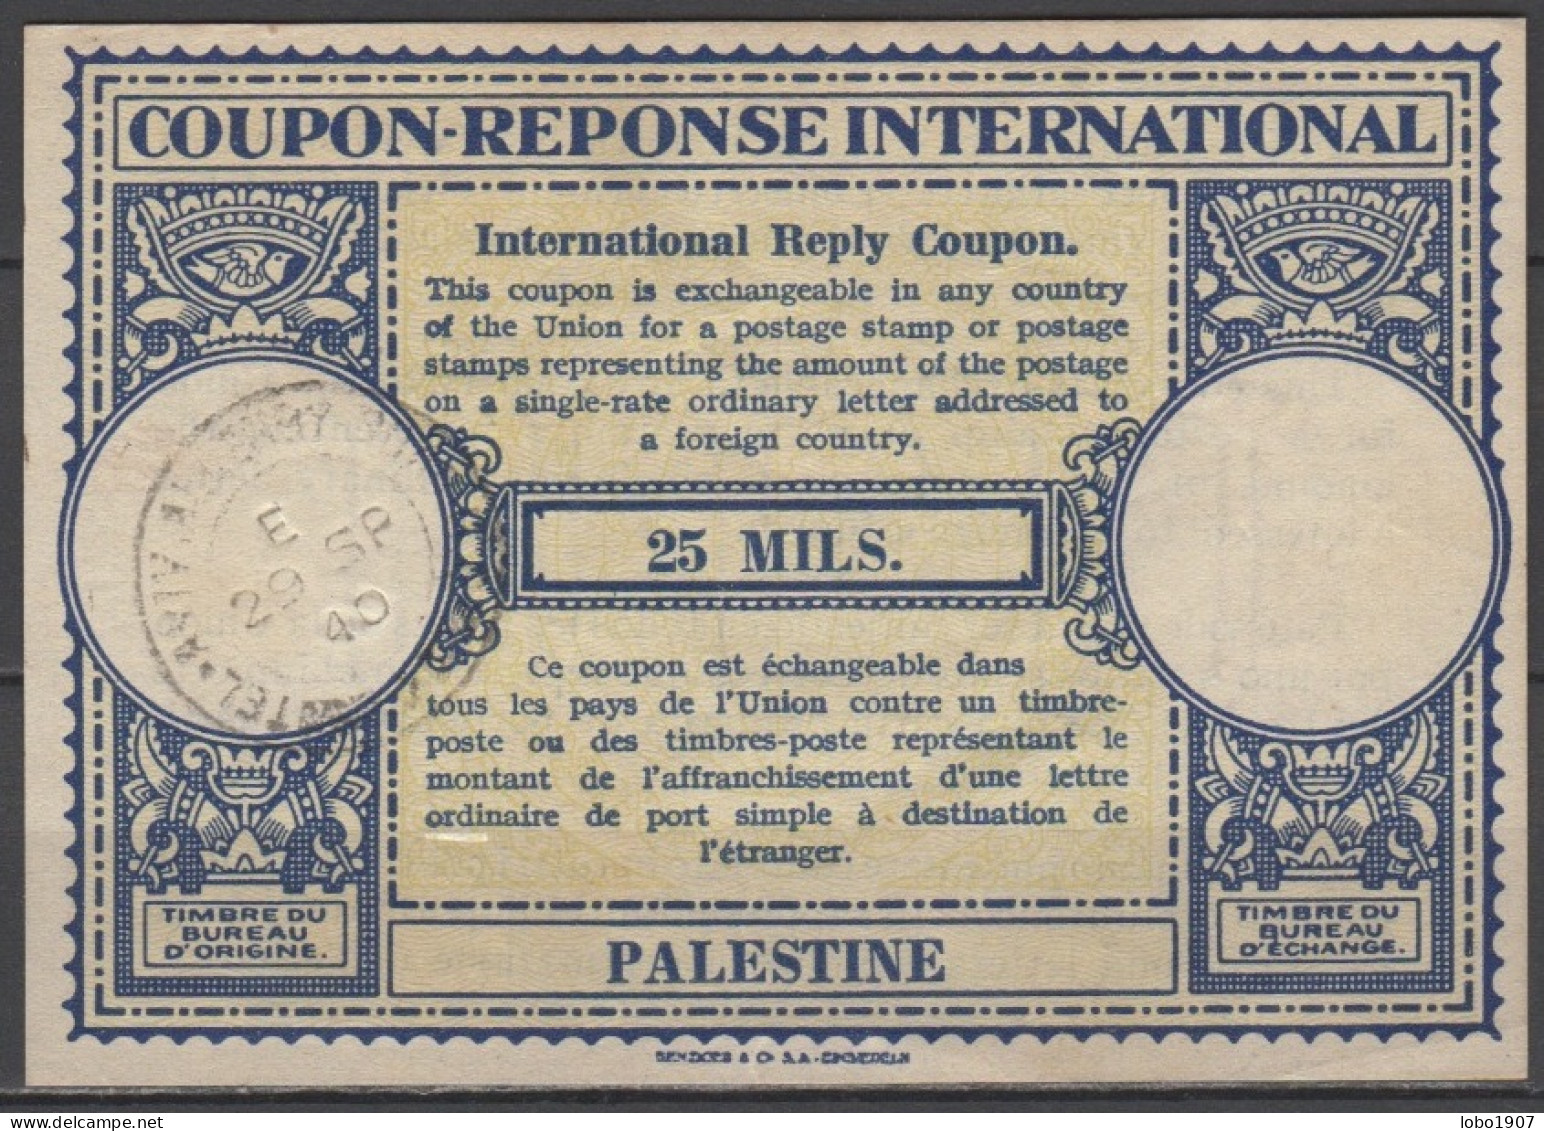 PALESTINE 1940  Lo12p  25 MILS.  Early International Reply Coupon Reponse Antwortschein IRC IAS   T.A. ALLENBY ROAD 29.0 - Palestine